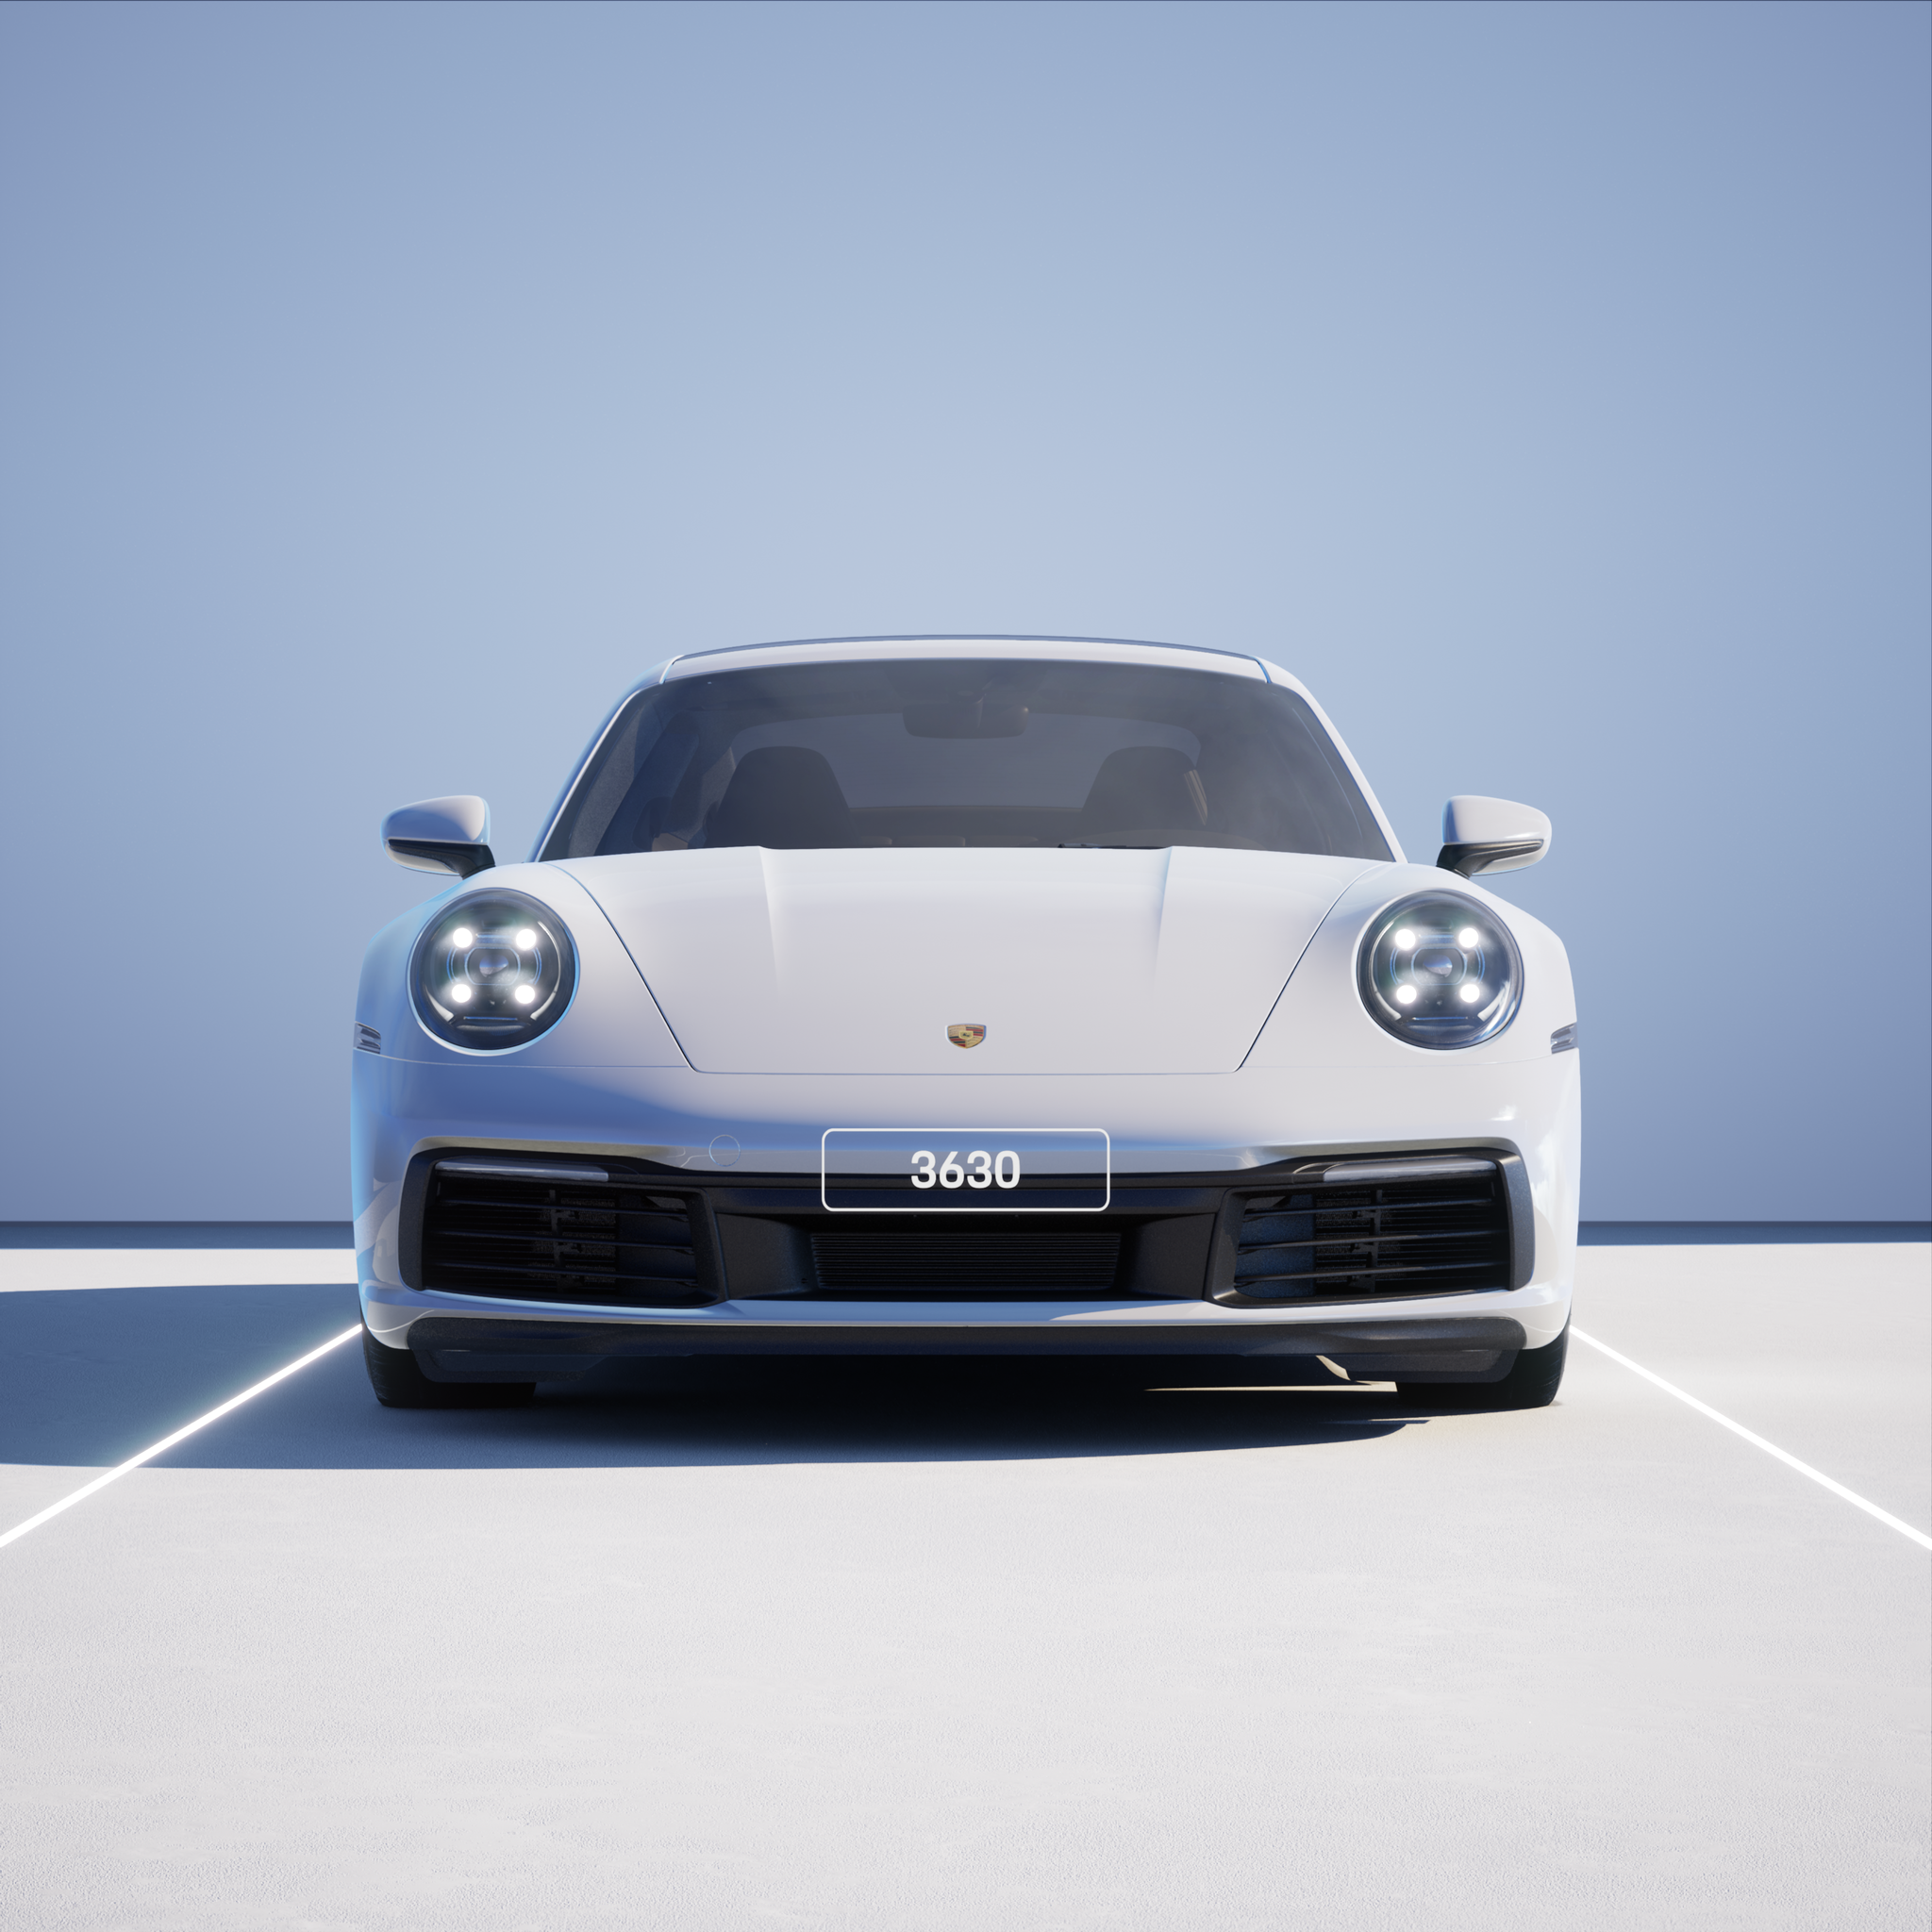 The PORSCHΞ 911 3630 image in phase